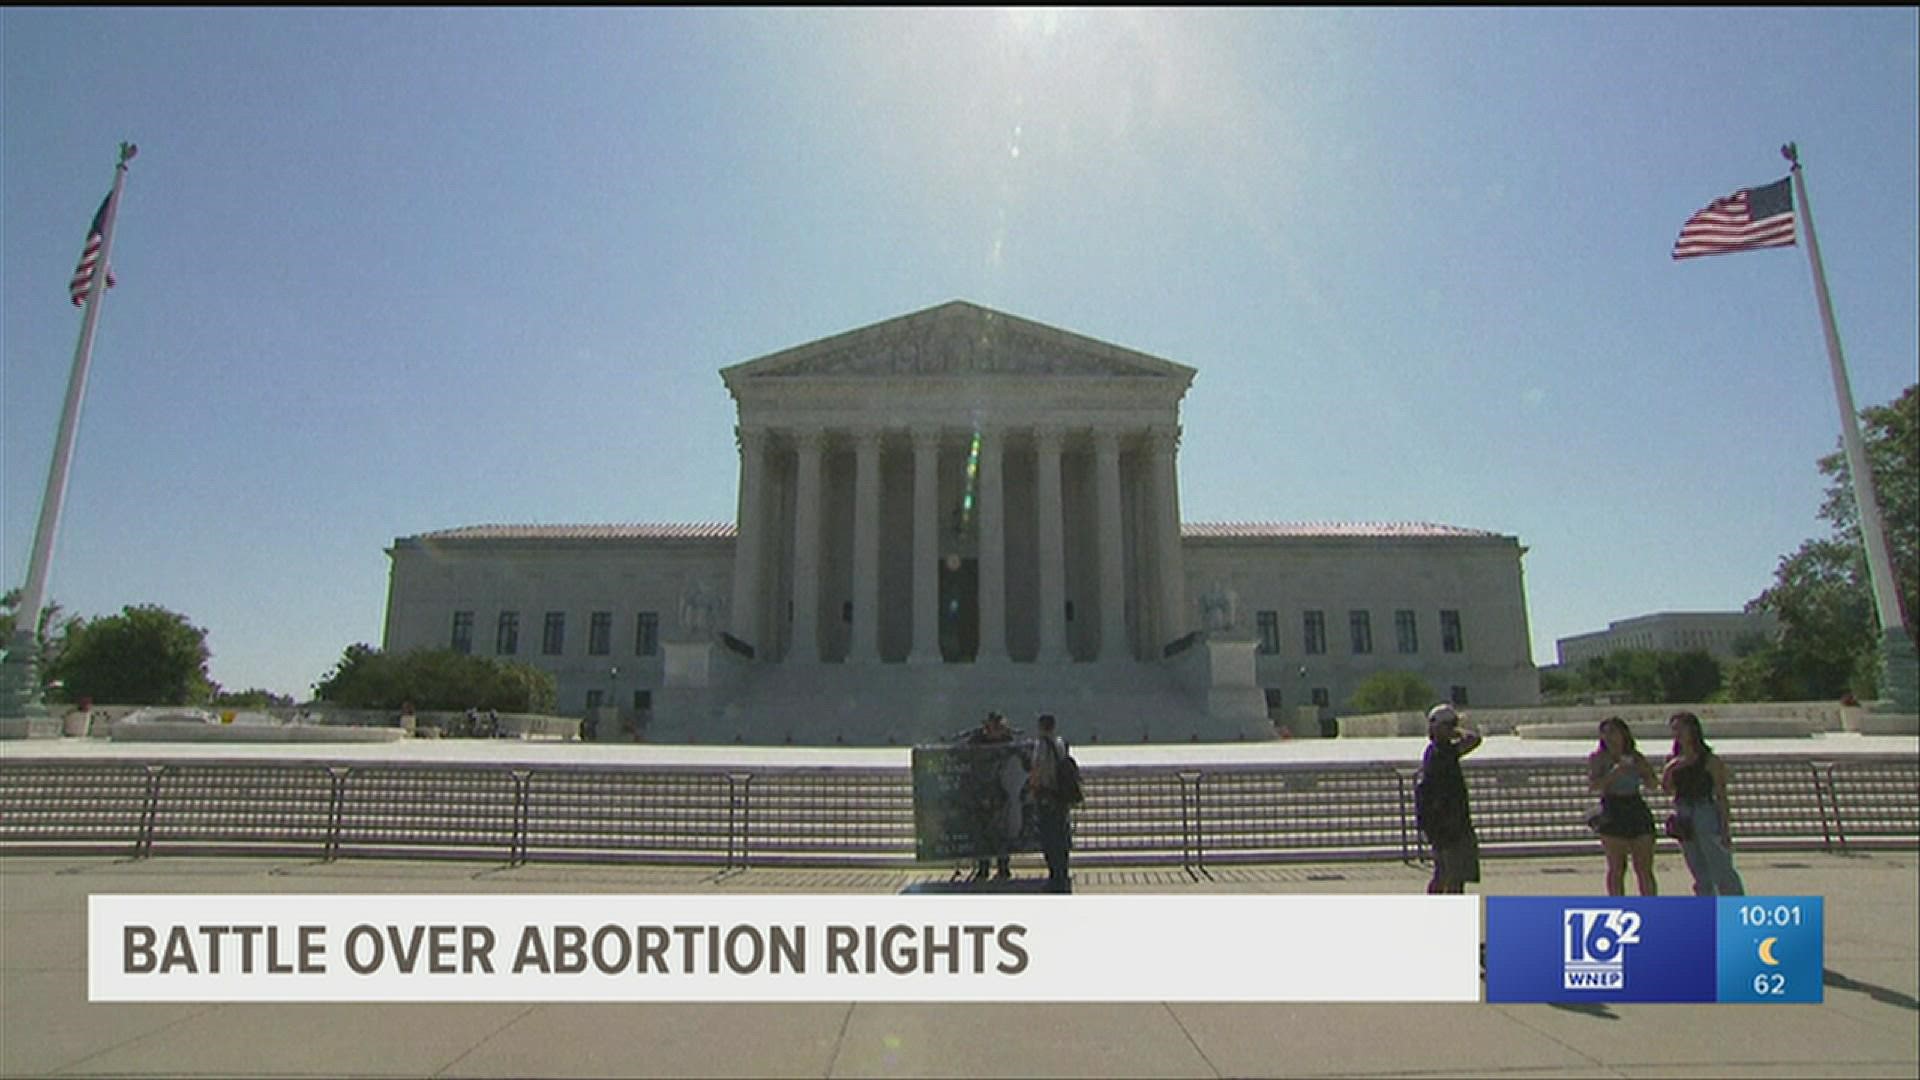 Growing anger and disappointment among Abortion Rights advocates after a leaked draft opinion looking to overturn Roe V Wade was determine to be authentic.